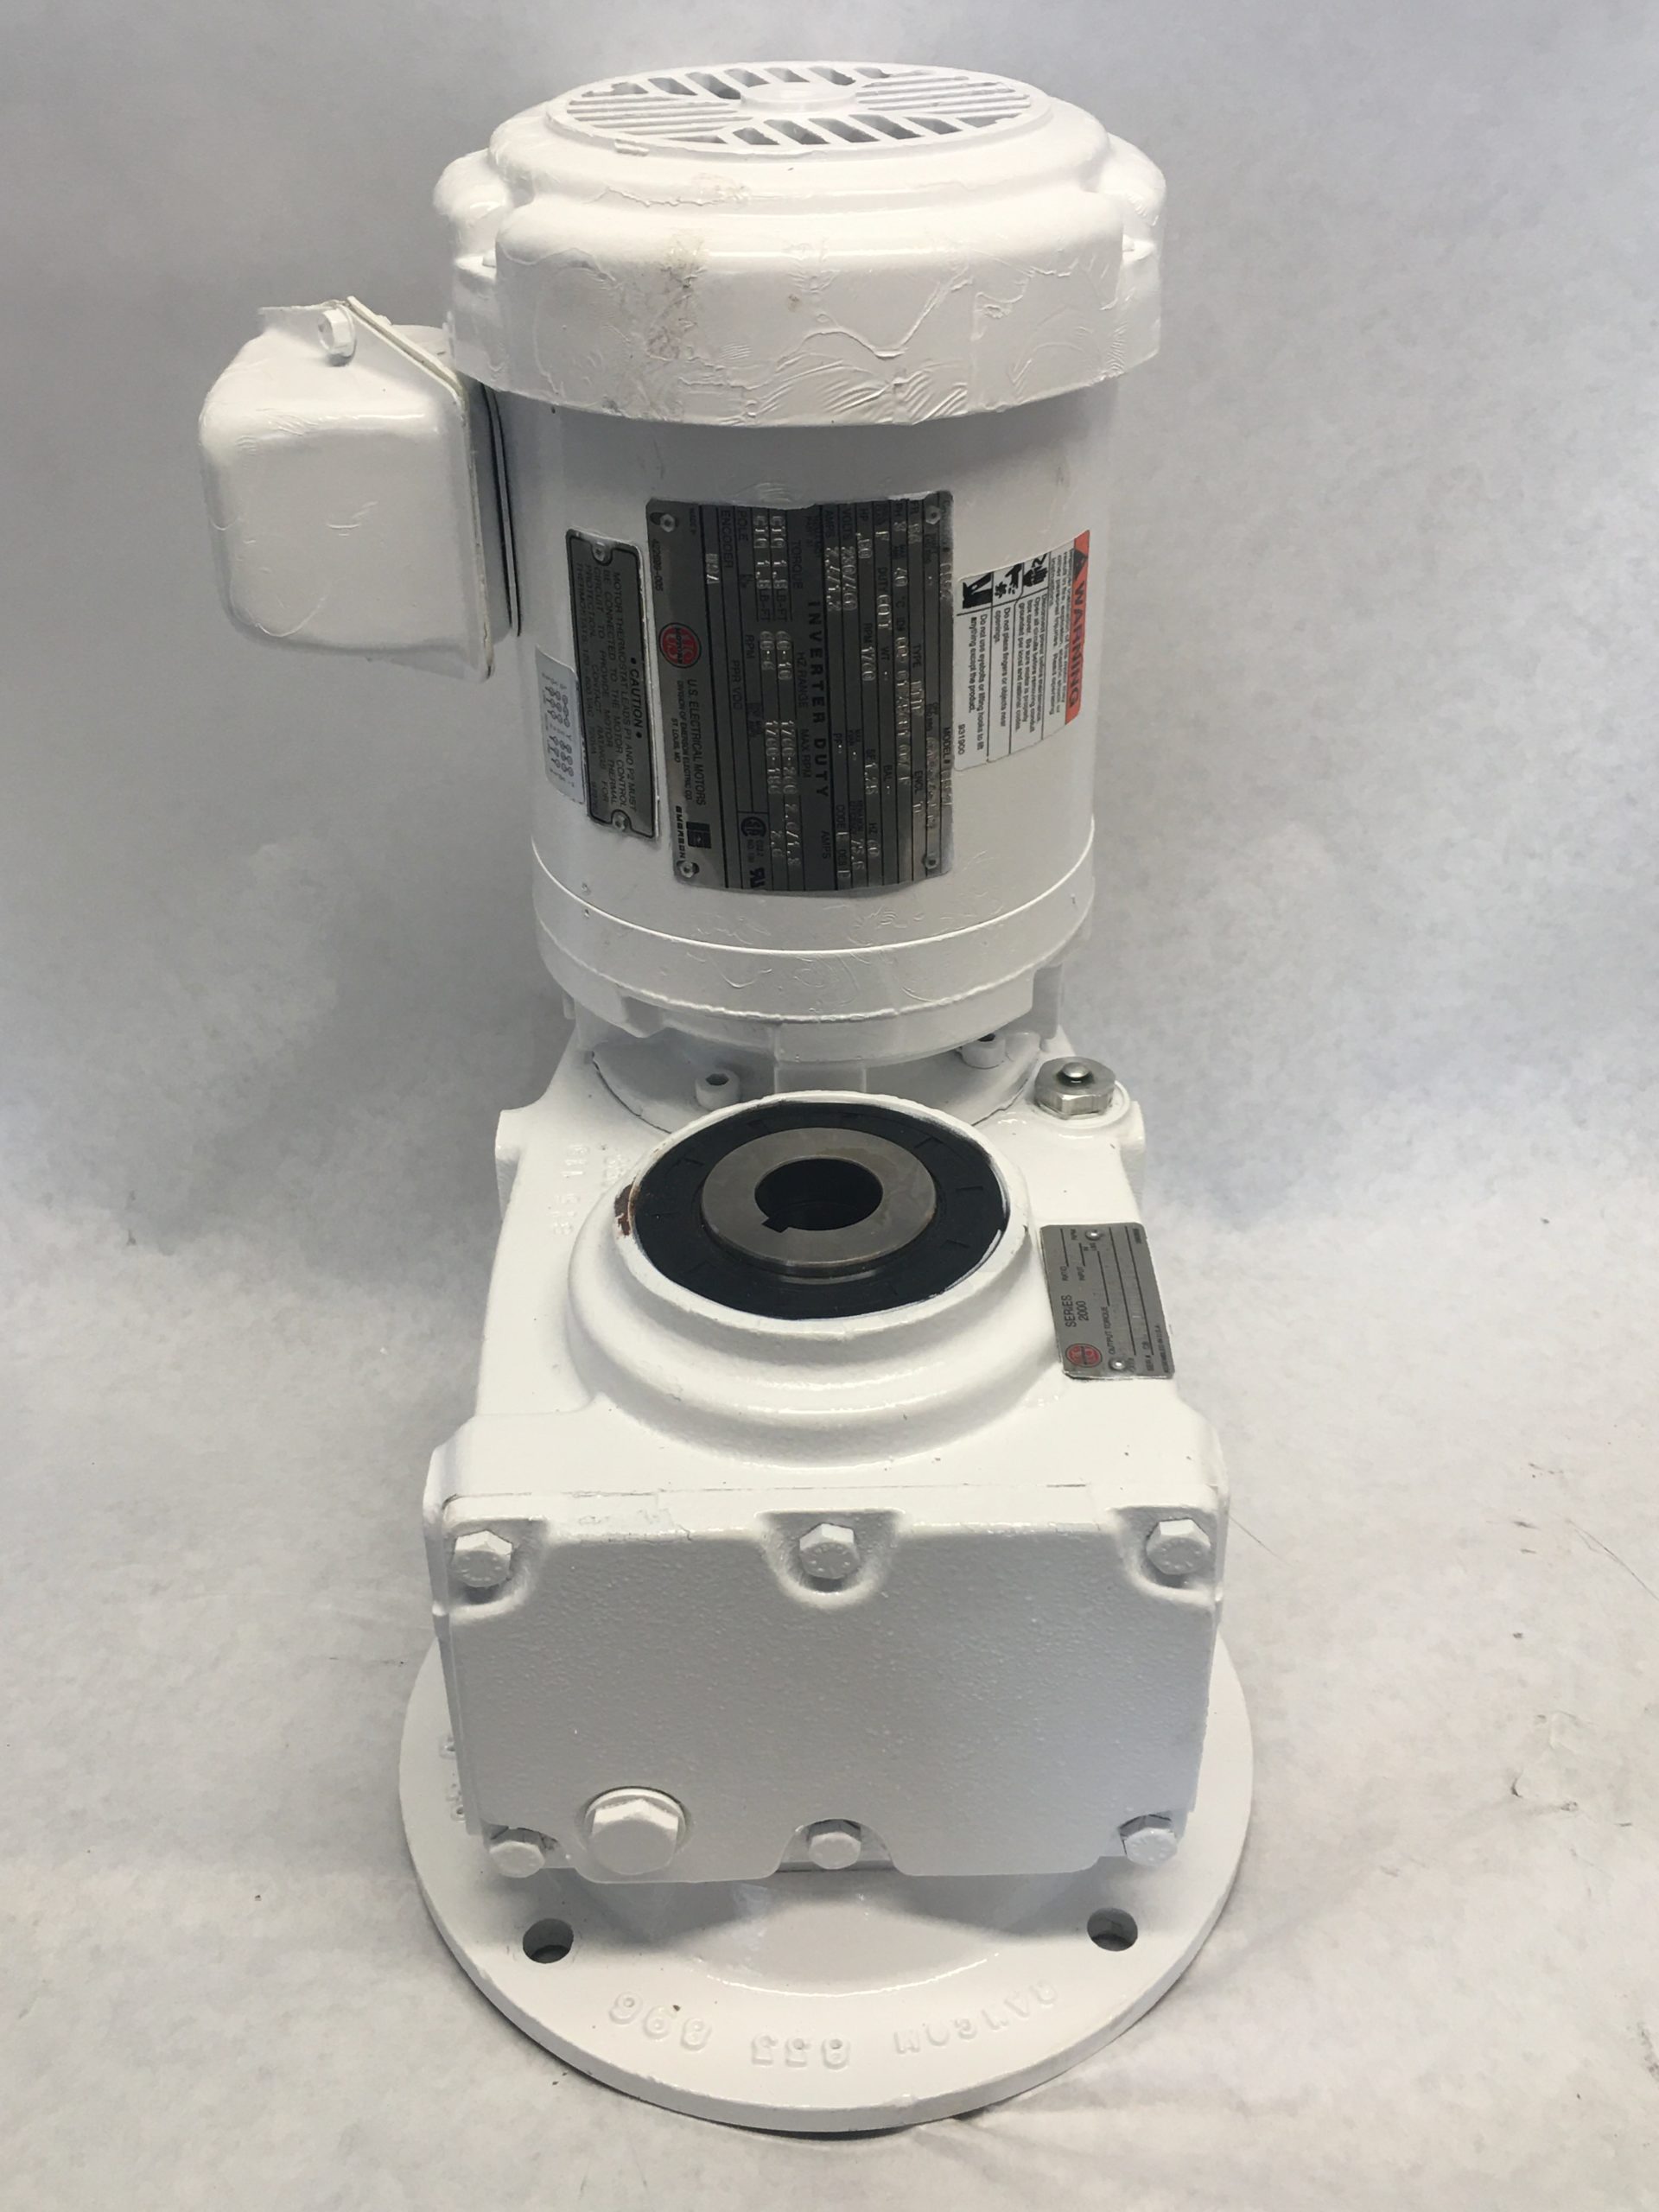 G592-A | Aridyne G592-A Inverter Duty Motor Series 2000 with Gearbox Repair